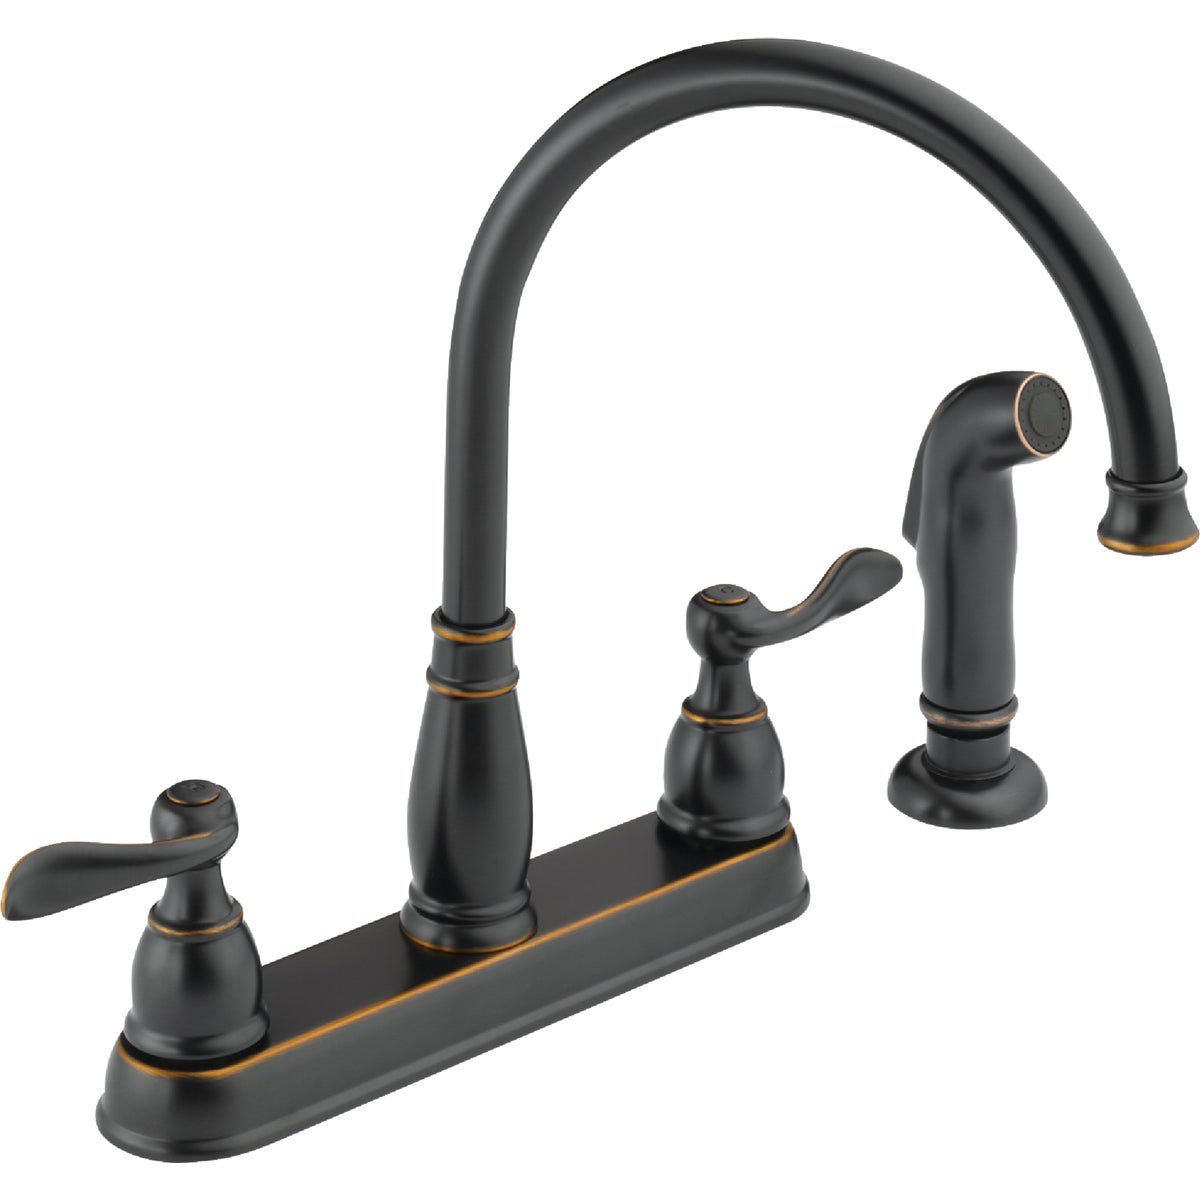 Windemere Delta 21996LF-OB Delta Windemere 2-Handle Lever Kitchen Faucet with Side Spray, Oil-Rubbed Bronze 21996LF-OB